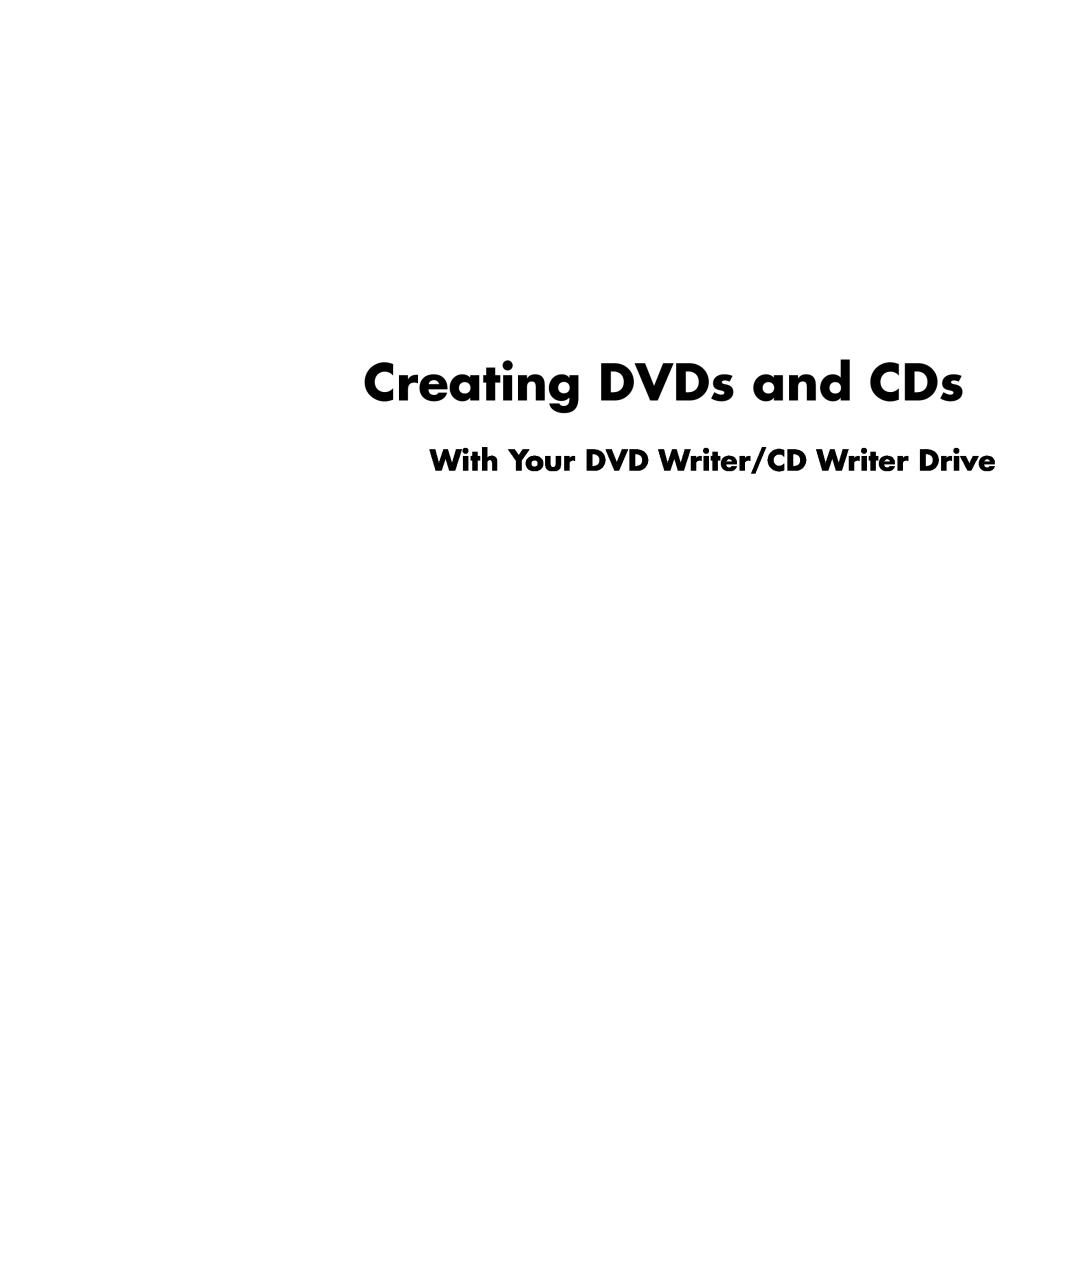 HP m470n, m476n, m390n, m400y (D7222P), m385c, m380n, m377n manual With Your DVD Writer/CD Writer Drive, Creating DVDs and CDs 